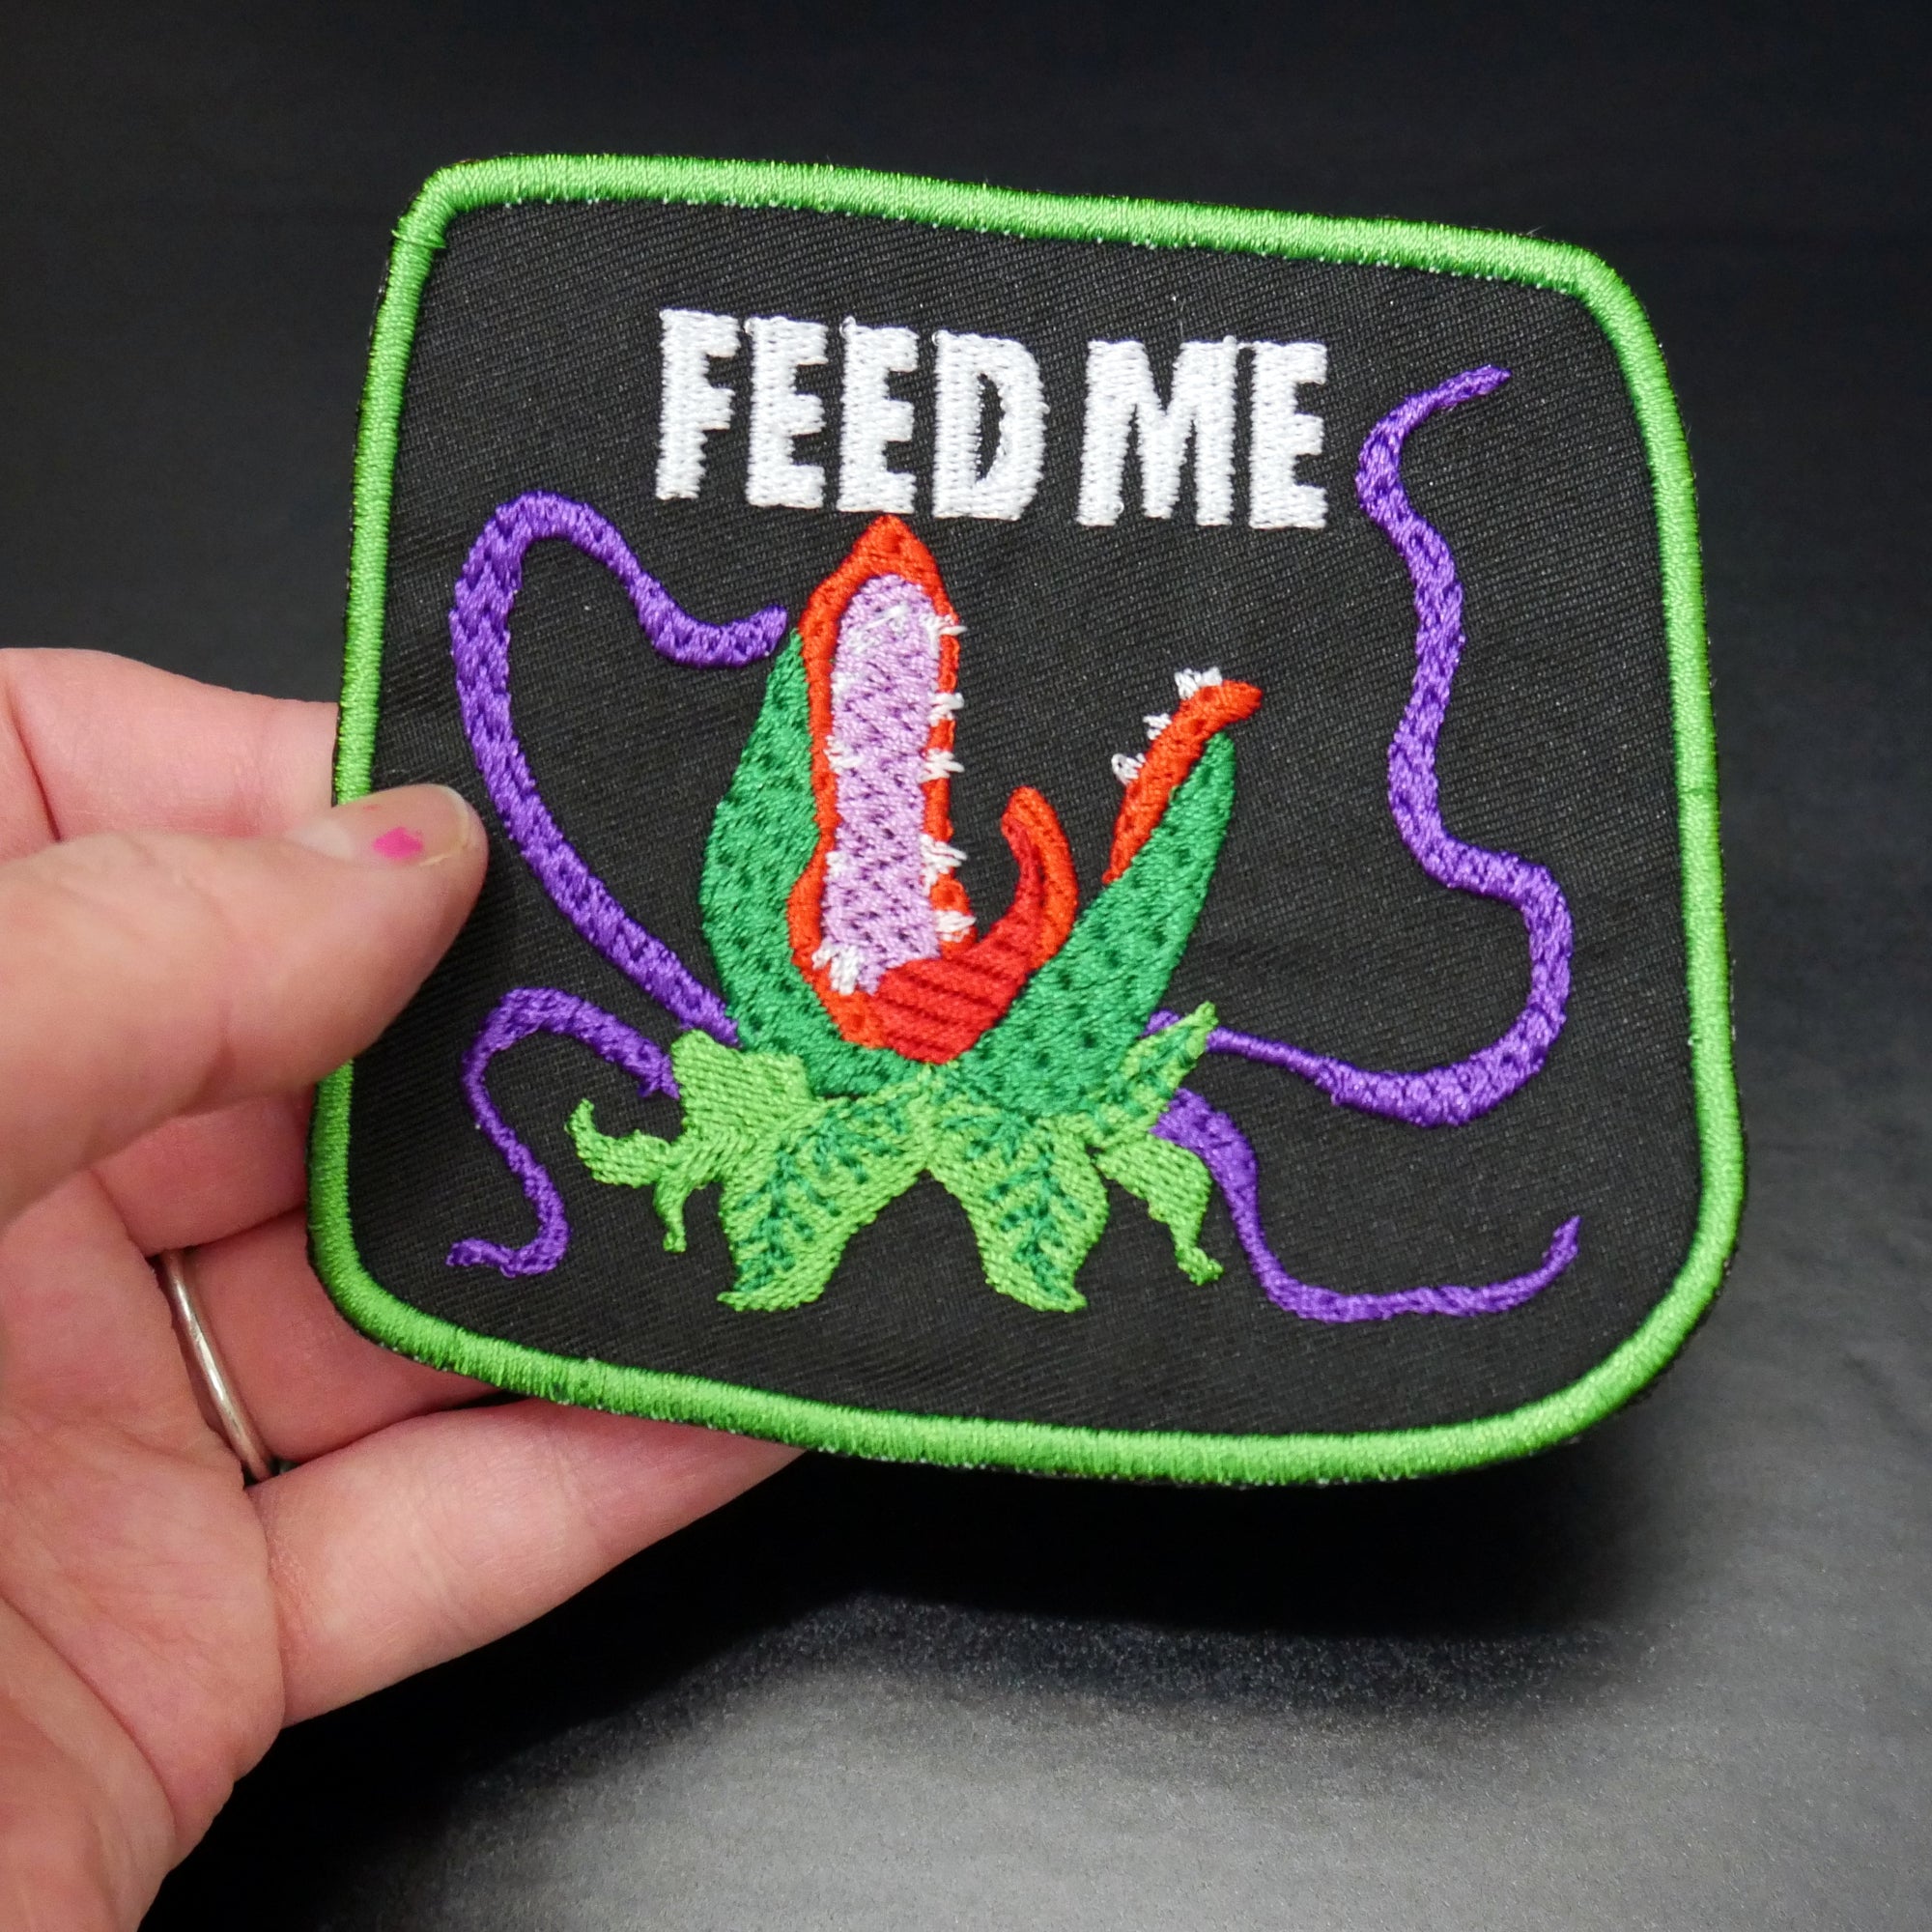 Feed Me Seymour Audrey 2 Patch